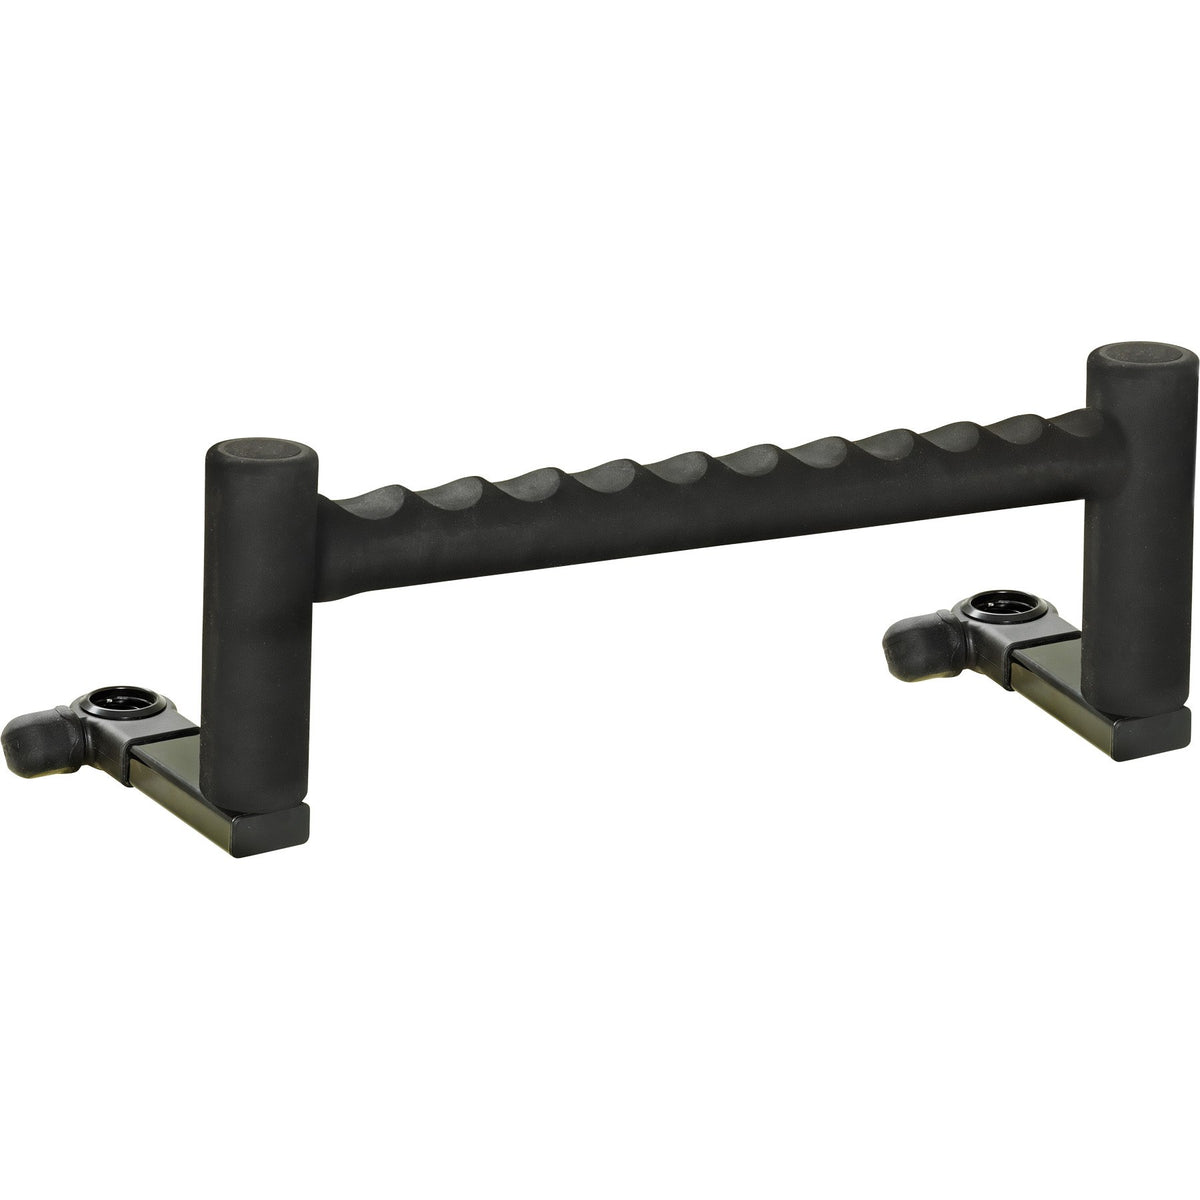 Reversible Pole Support